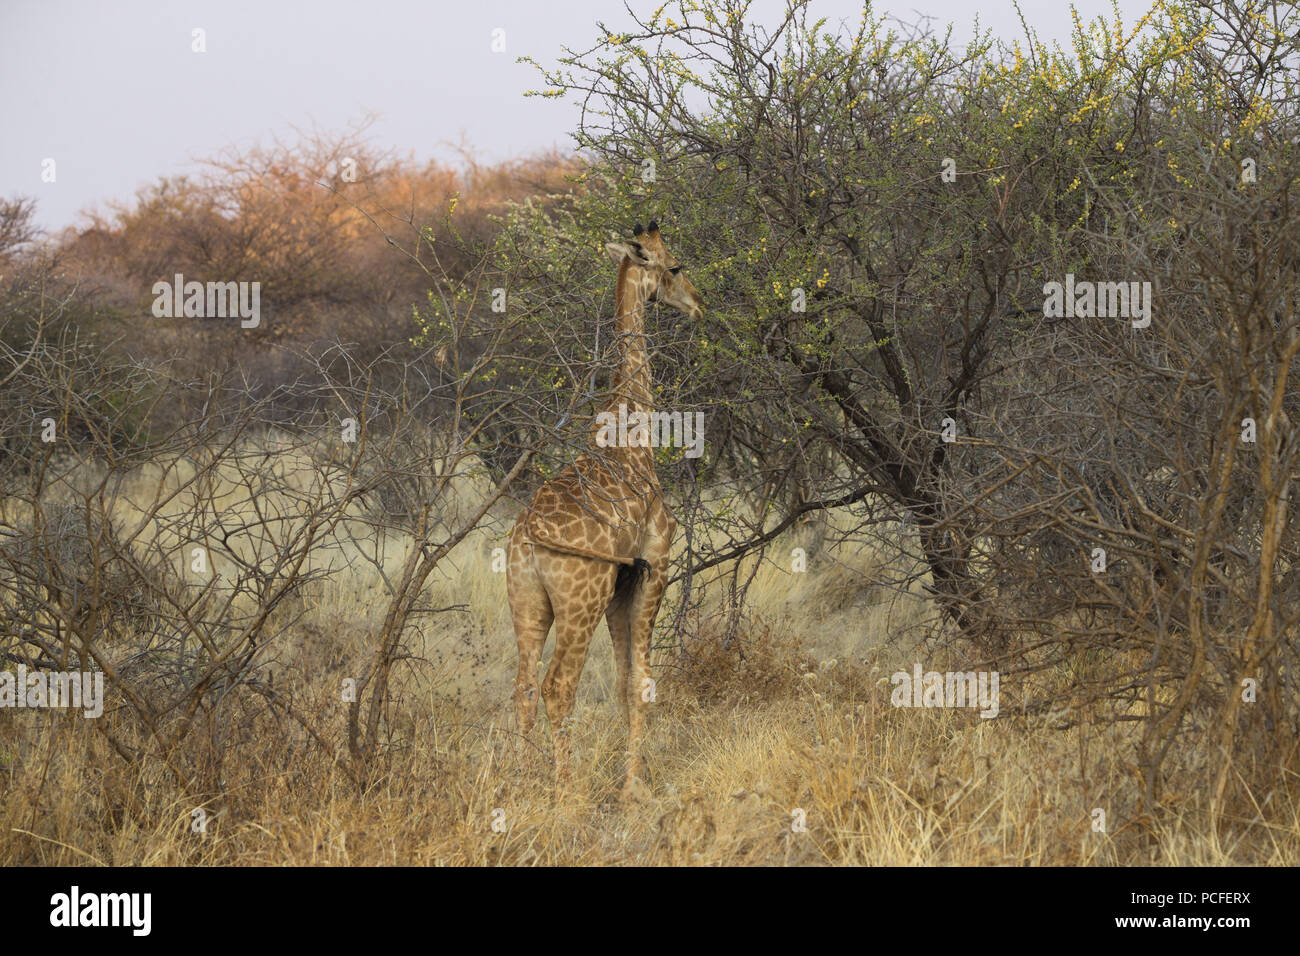 a small juvenile Giraffe (Giraffa camelopardalis) standing against a tree in the African savannah in Erindi game reserve, Namibia Stock Photo